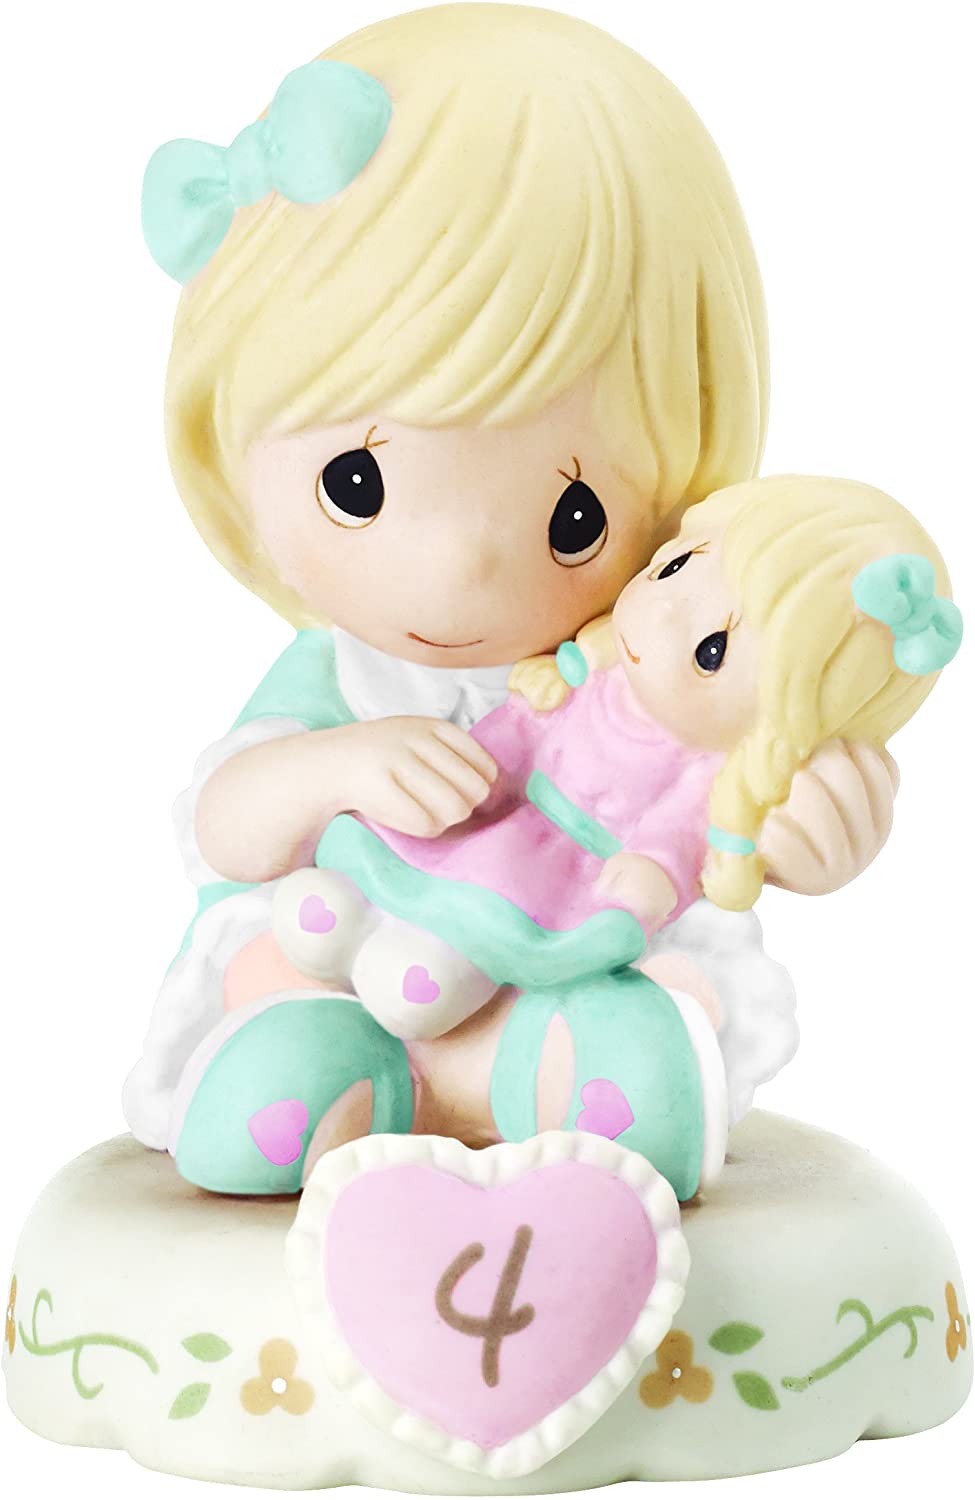 Precious Moments 152010 "Growing In Grace, Age 4" Girl Bisque Porcelain Figurine Birthday Gift